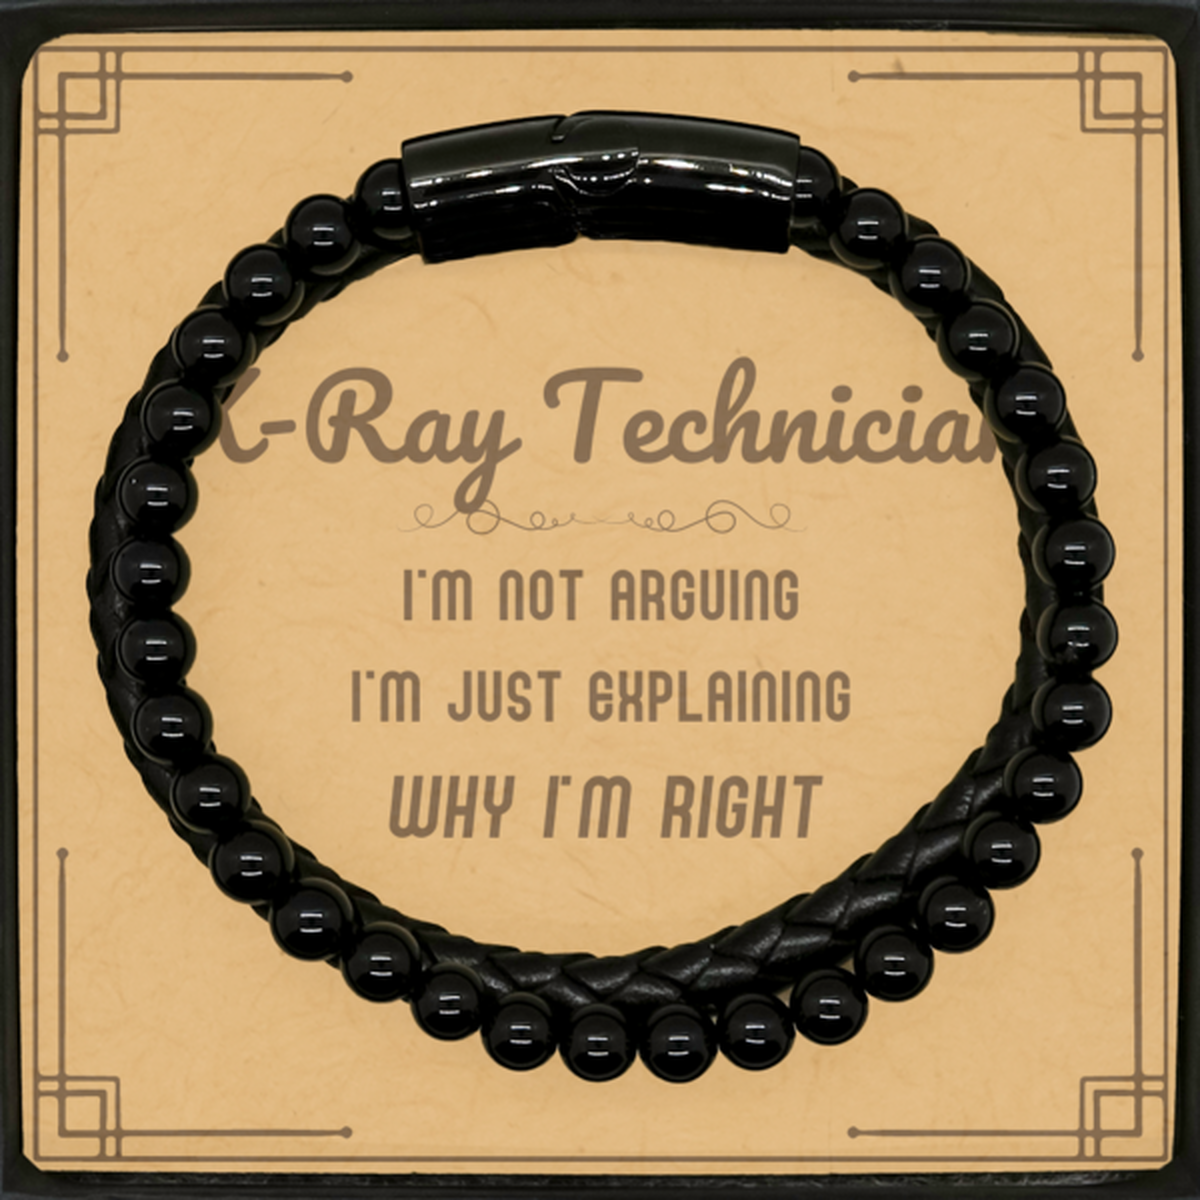 X-Ray Technician I'm not Arguing. I'm Just Explaining Why I'm RIGHT Stone Leather Bracelets, Funny Saying Quote X-Ray Technician Gifts For X-Ray Technician Message Card Graduation Birthday Christmas Gifts for Men Women Coworker